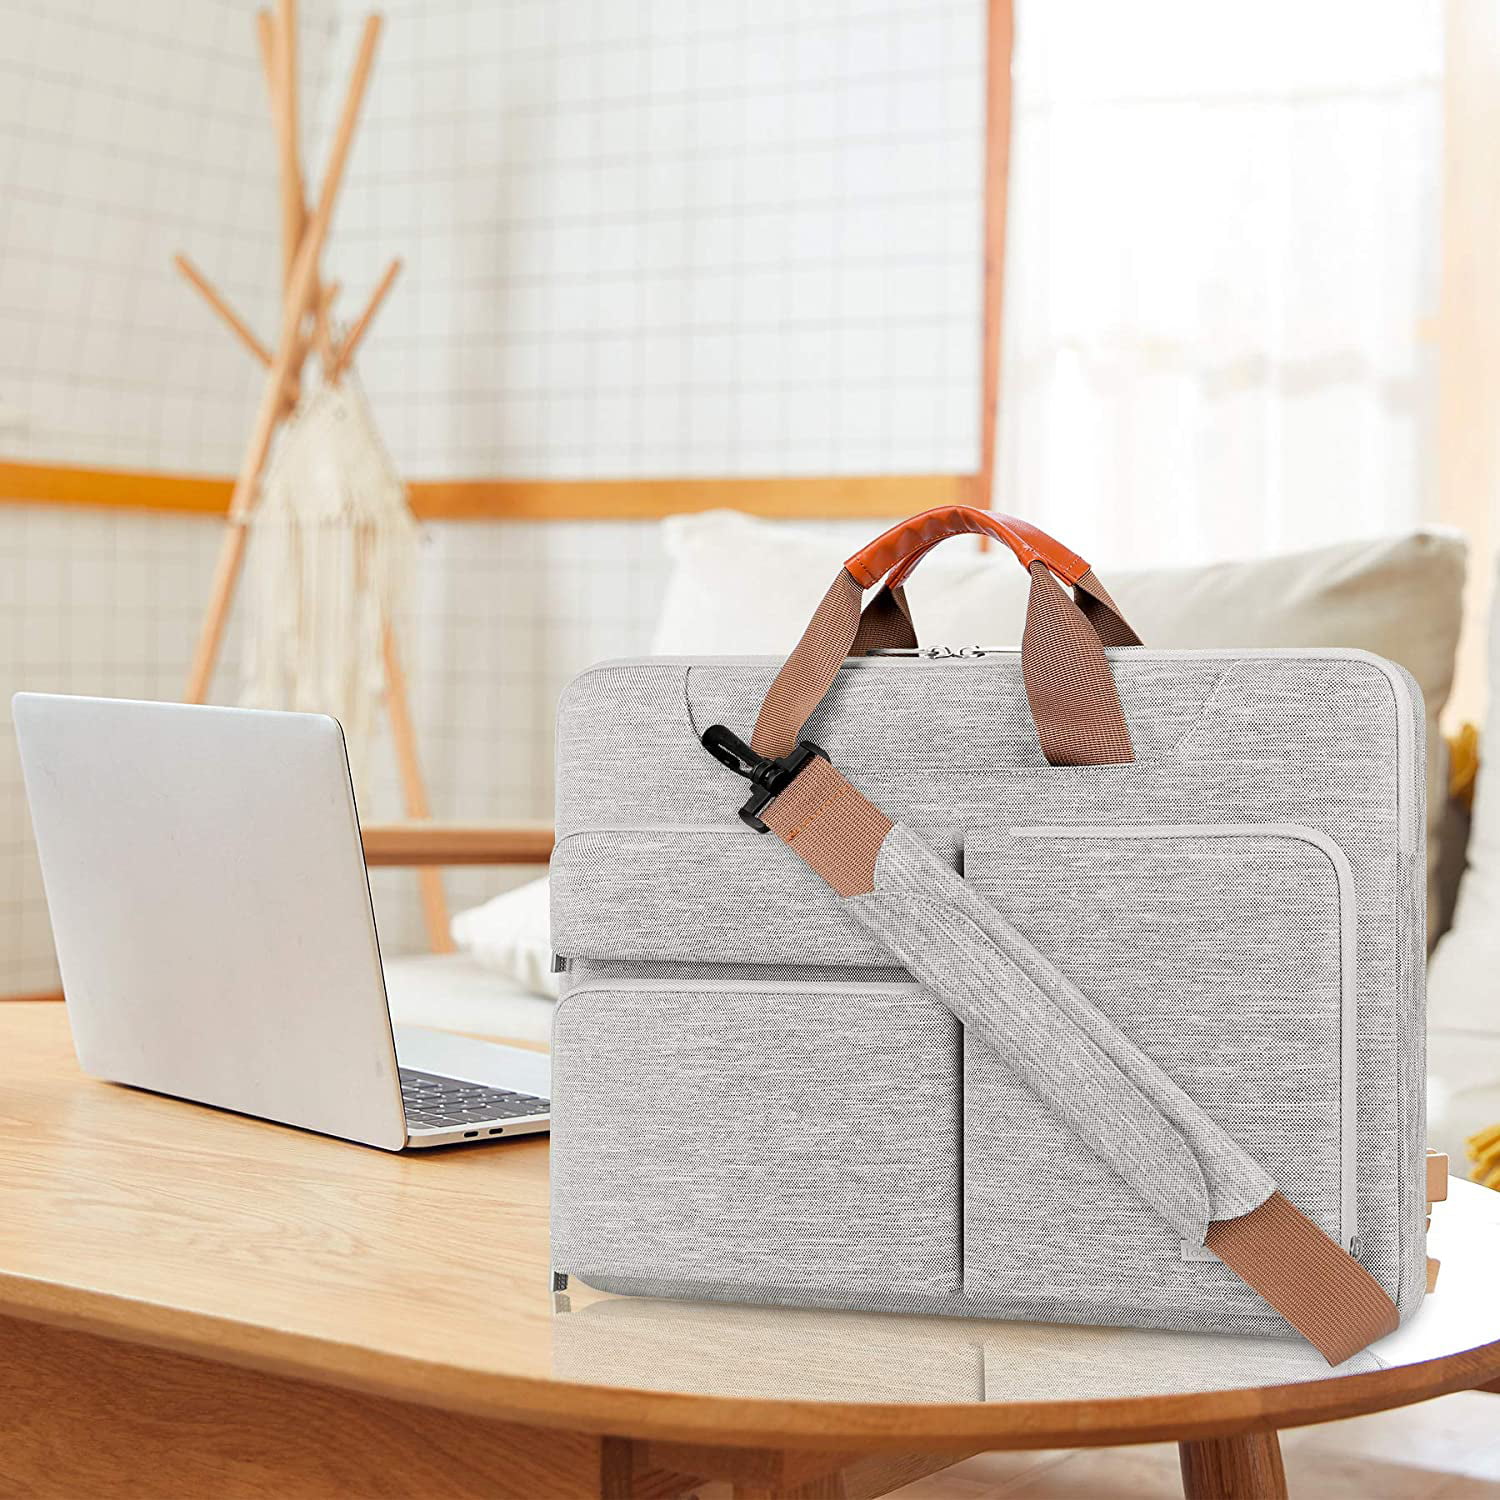 This Fold-up Duffle Bag Is Packable, Water-resistant, and Lightweight — and  It's Only $15 on